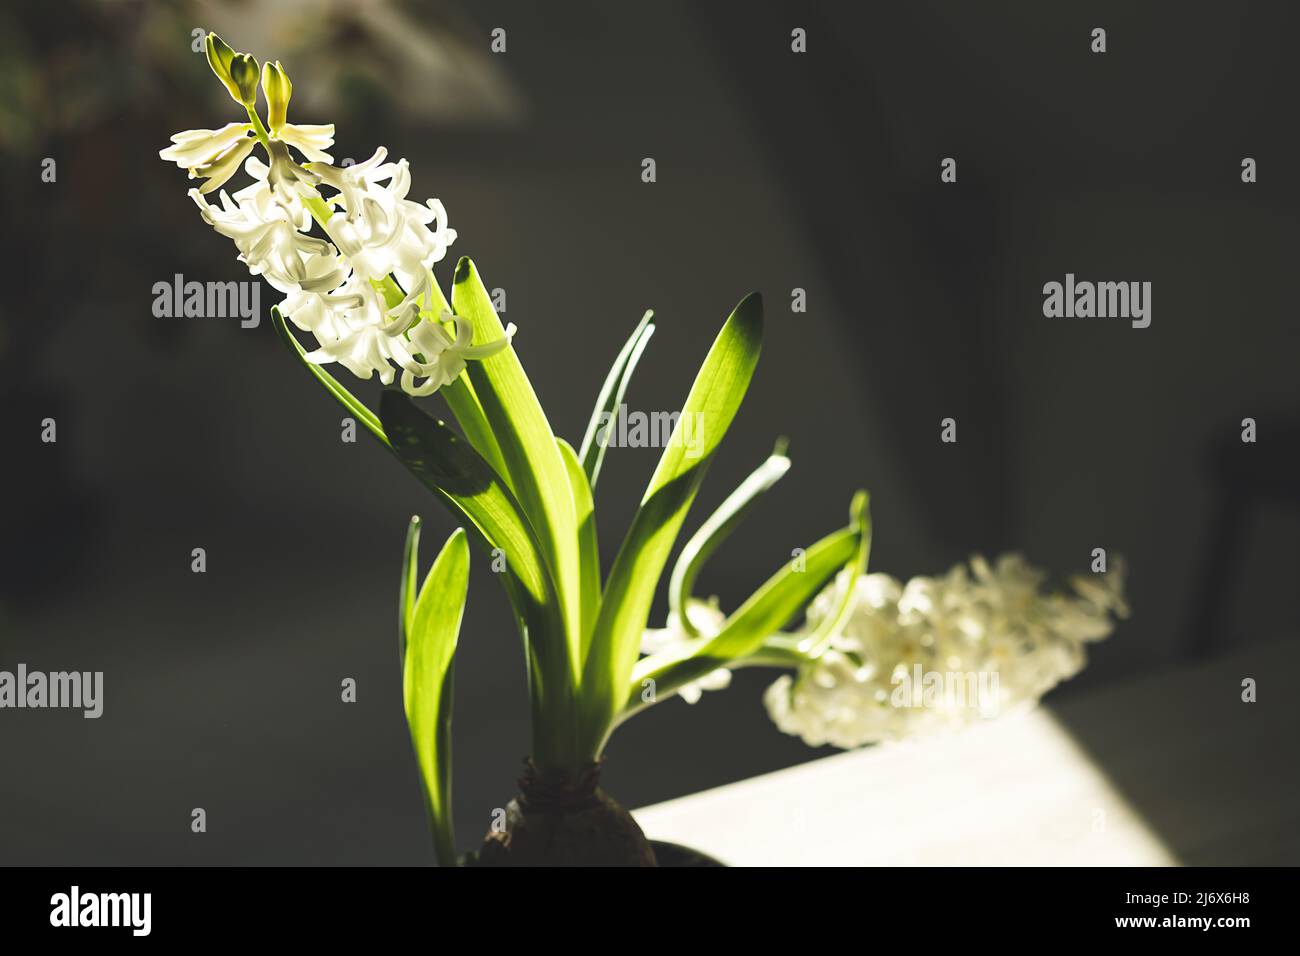 White hyacinth flower close-up in the sunlight Stock Photo